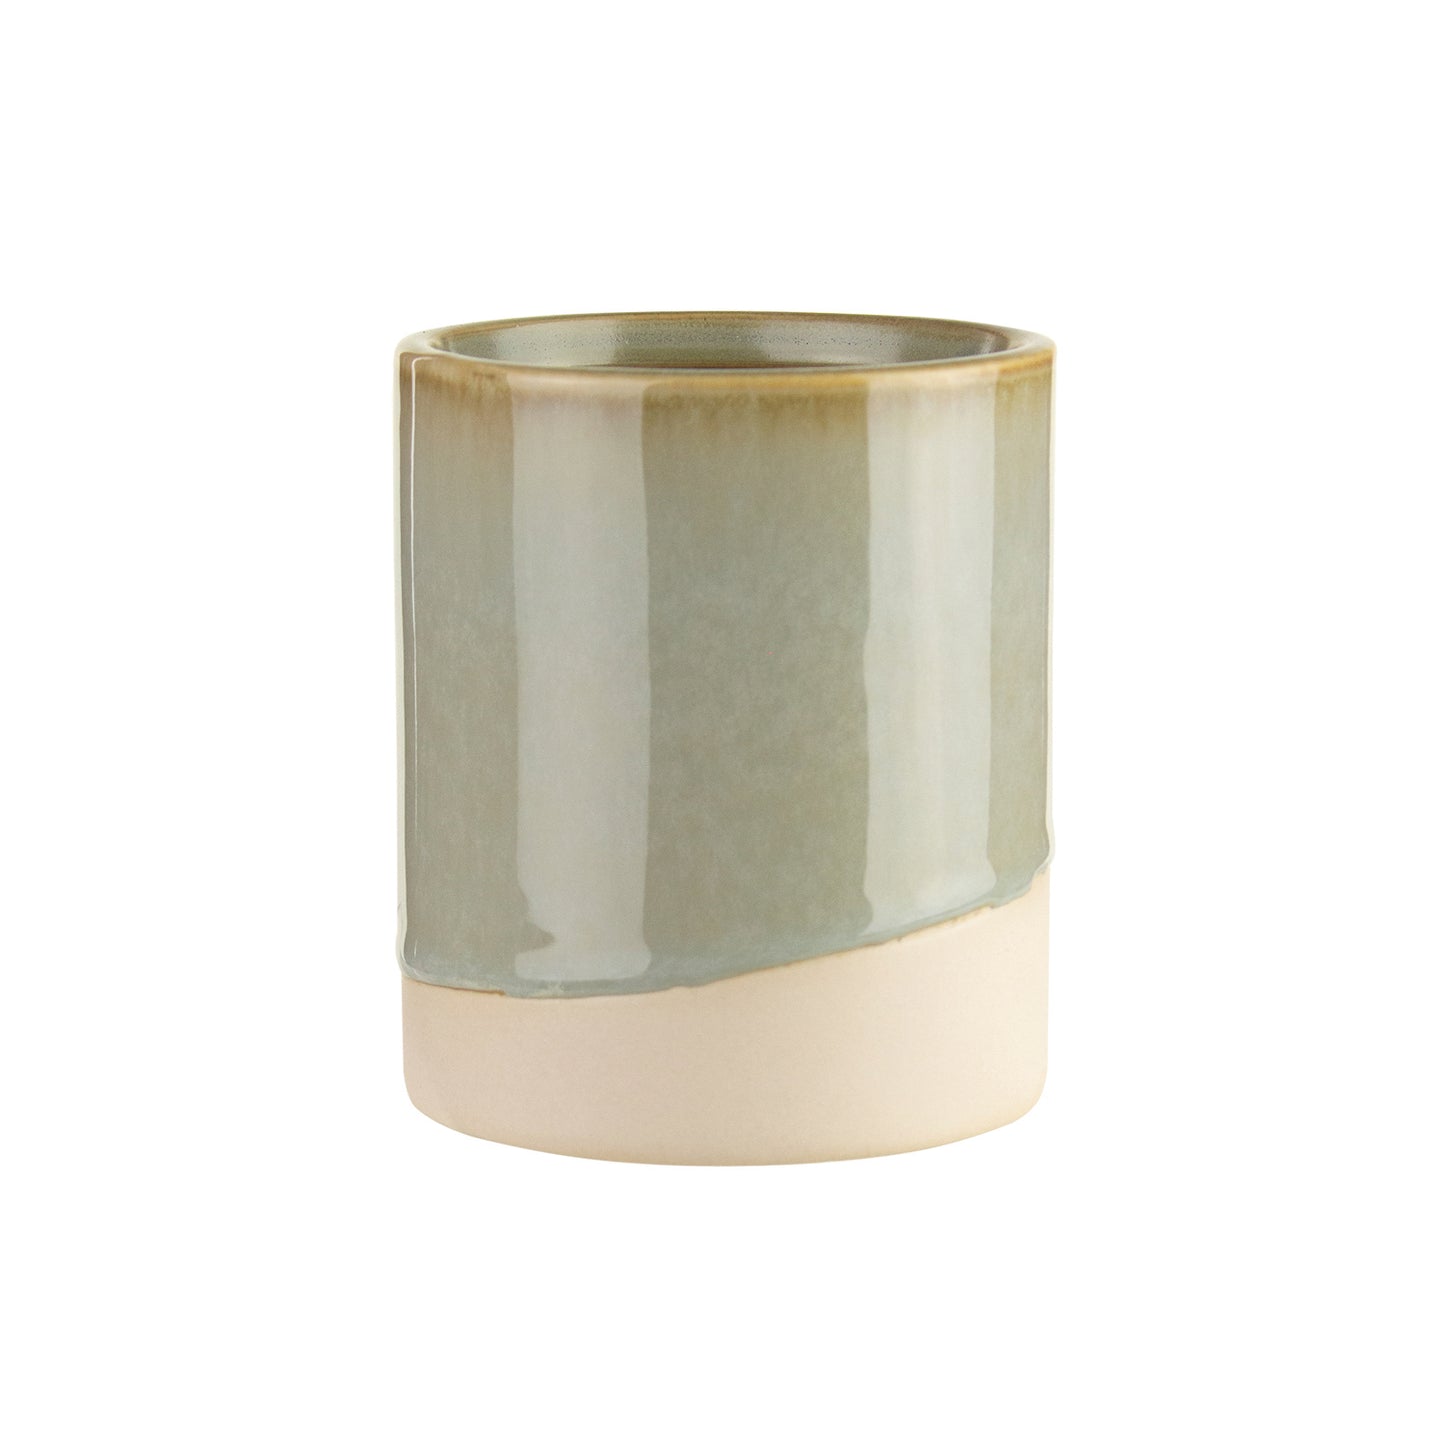 A 4-inch ceramic essential vase with a dual-tone design, featuring a glossy, glazed finish with vertical stripes in shades of pale green and a smooth matte blush pink base, isolated on a white background.